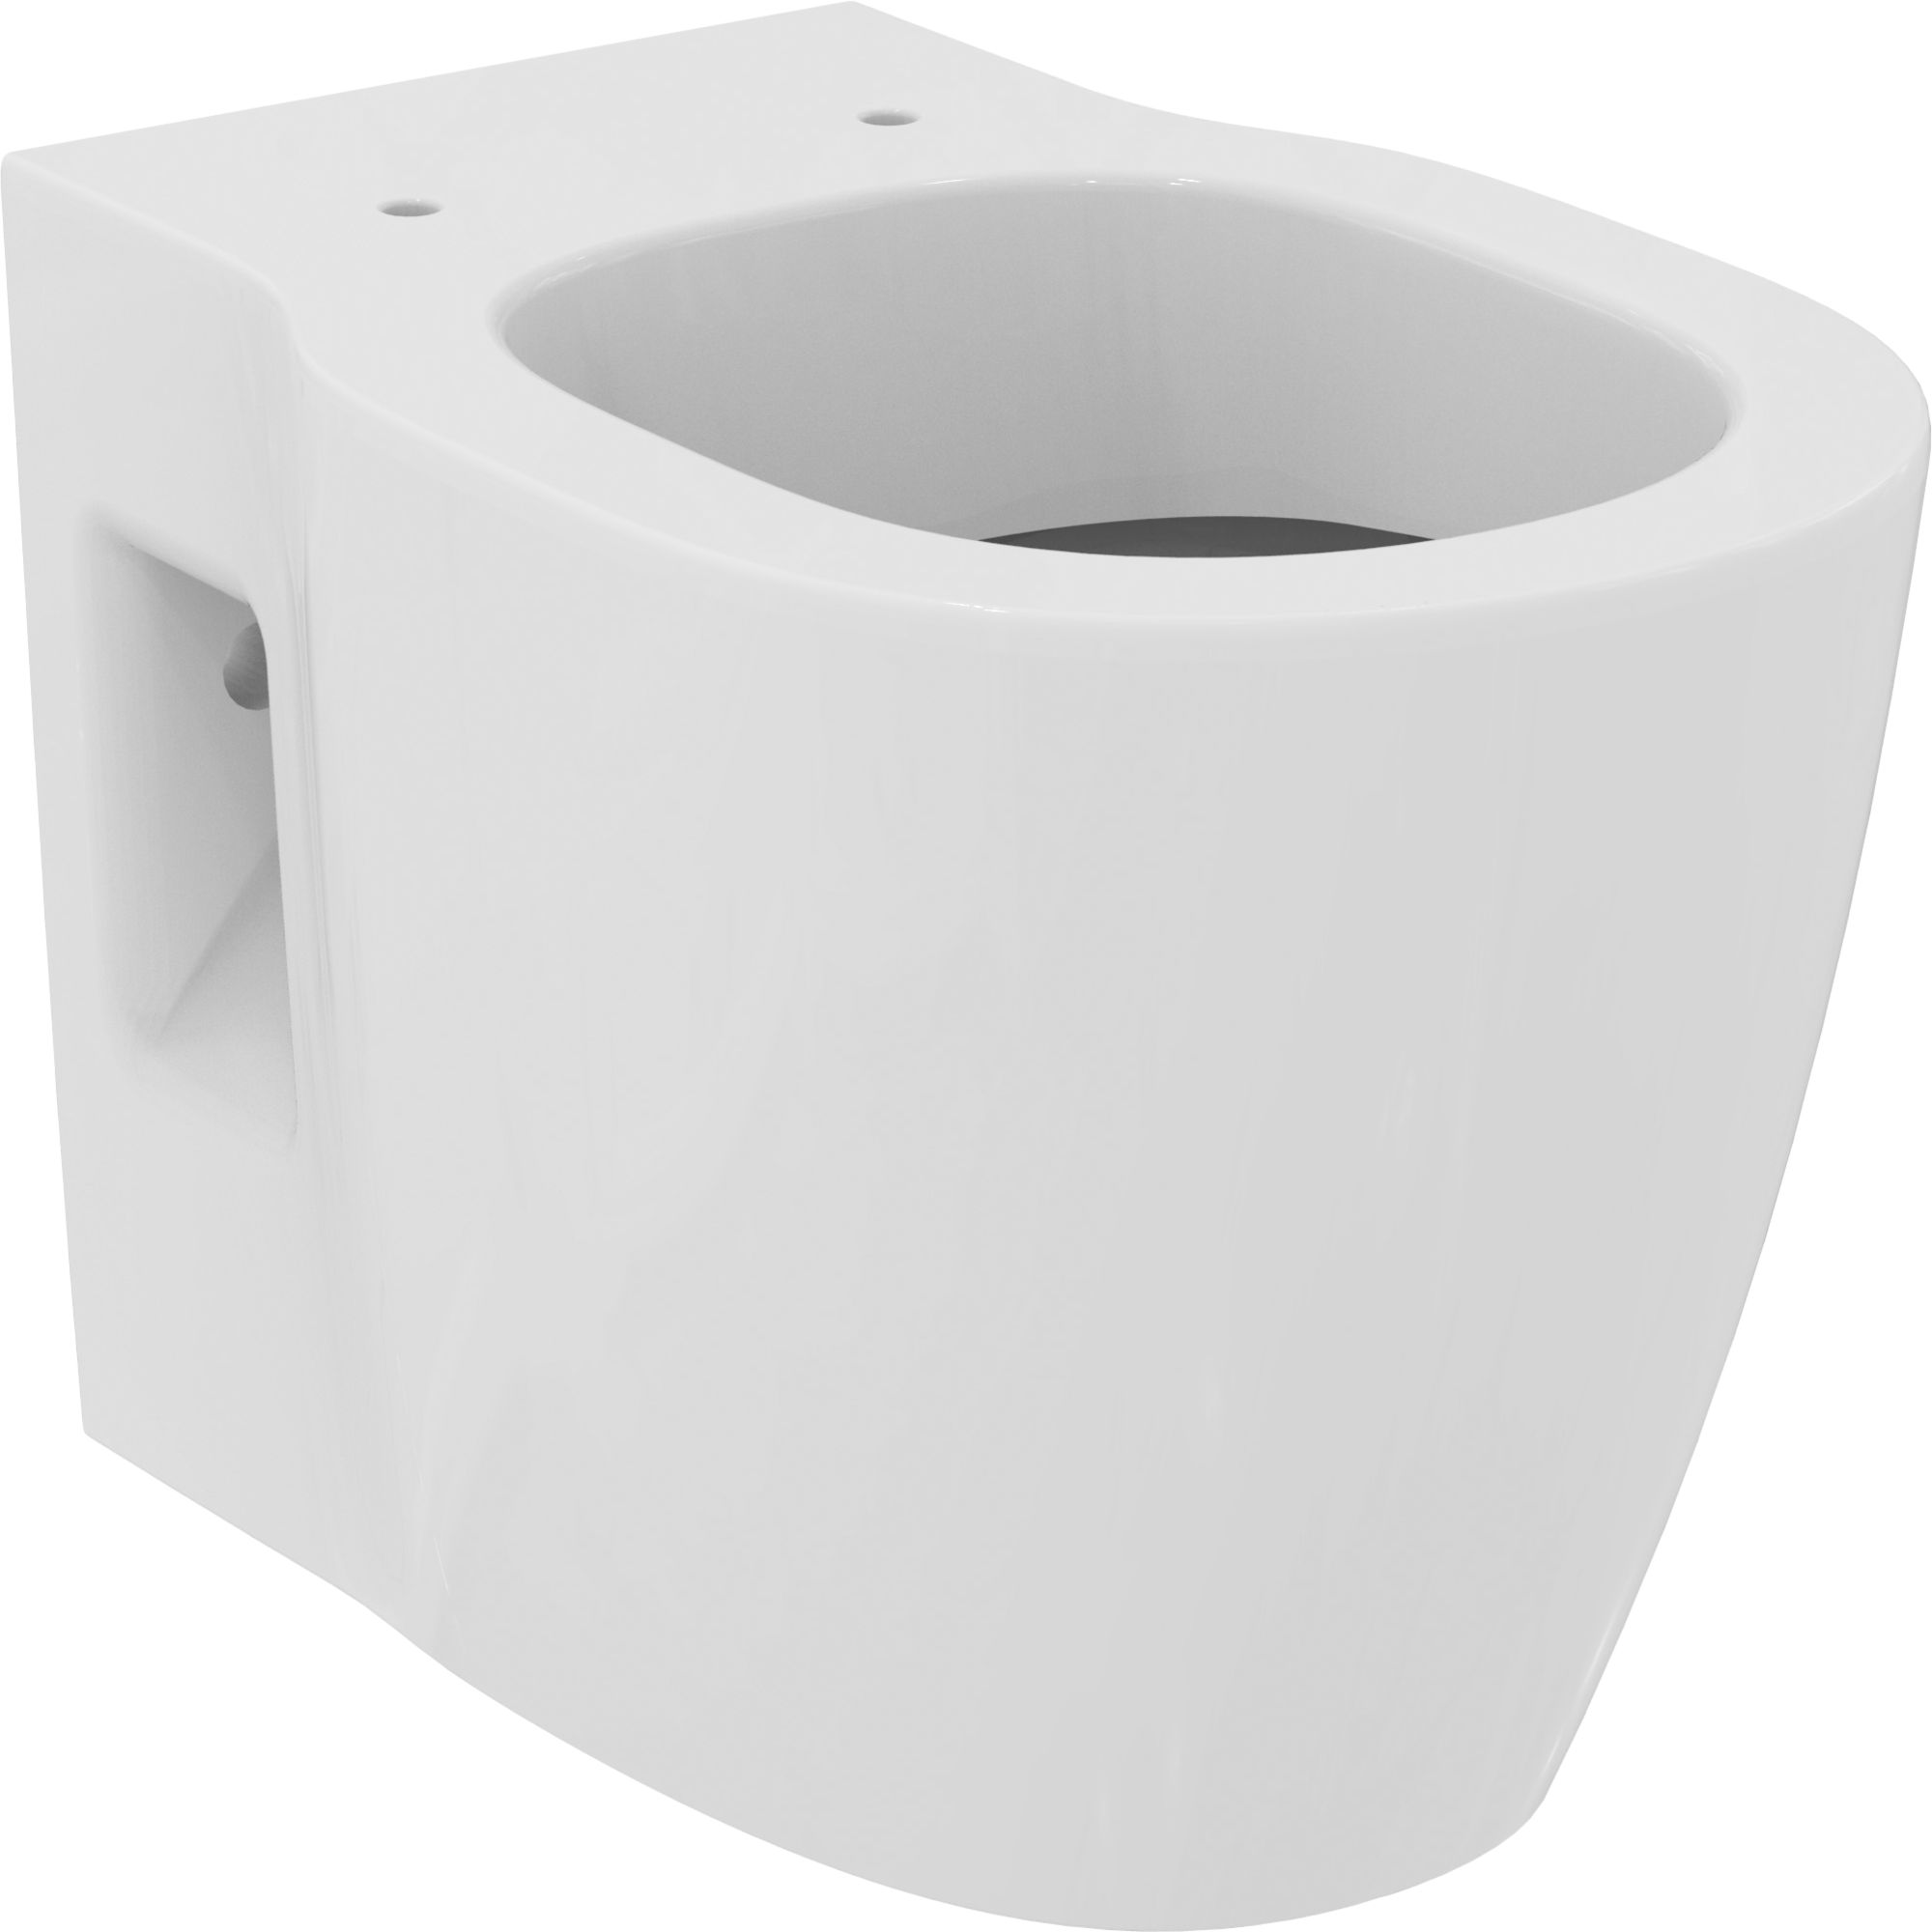 Ideal Standard Concept Freedom Comfort height White Boxed rim Wall hung Round Toilet pan with Soft close seat